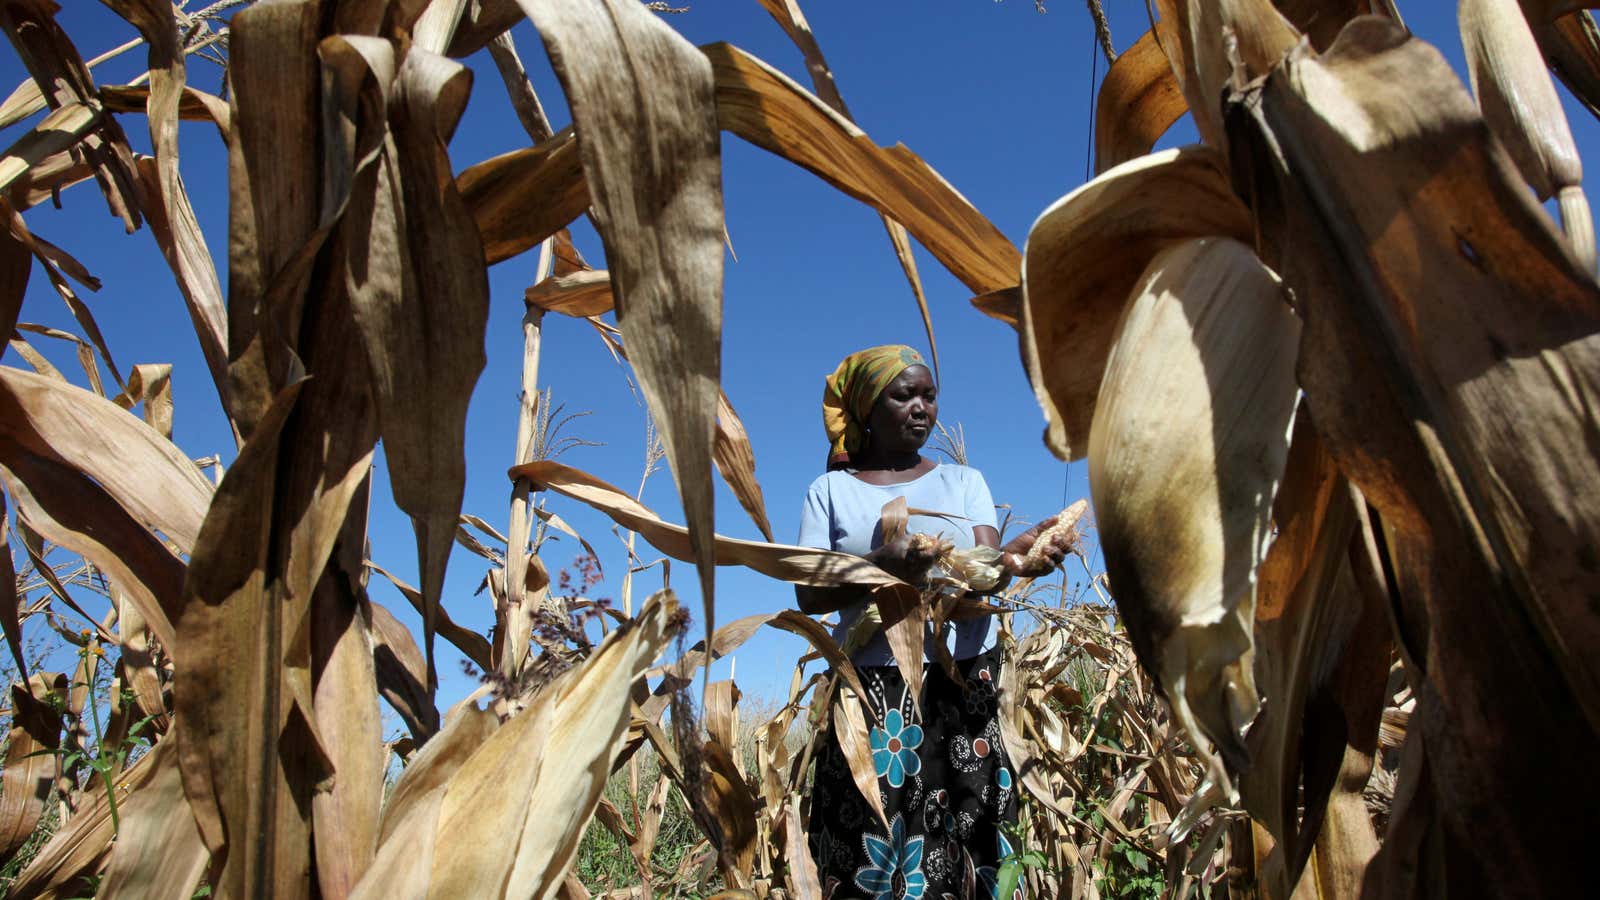 Zimbabwe’s subsistence farmers have struggled in recent years.